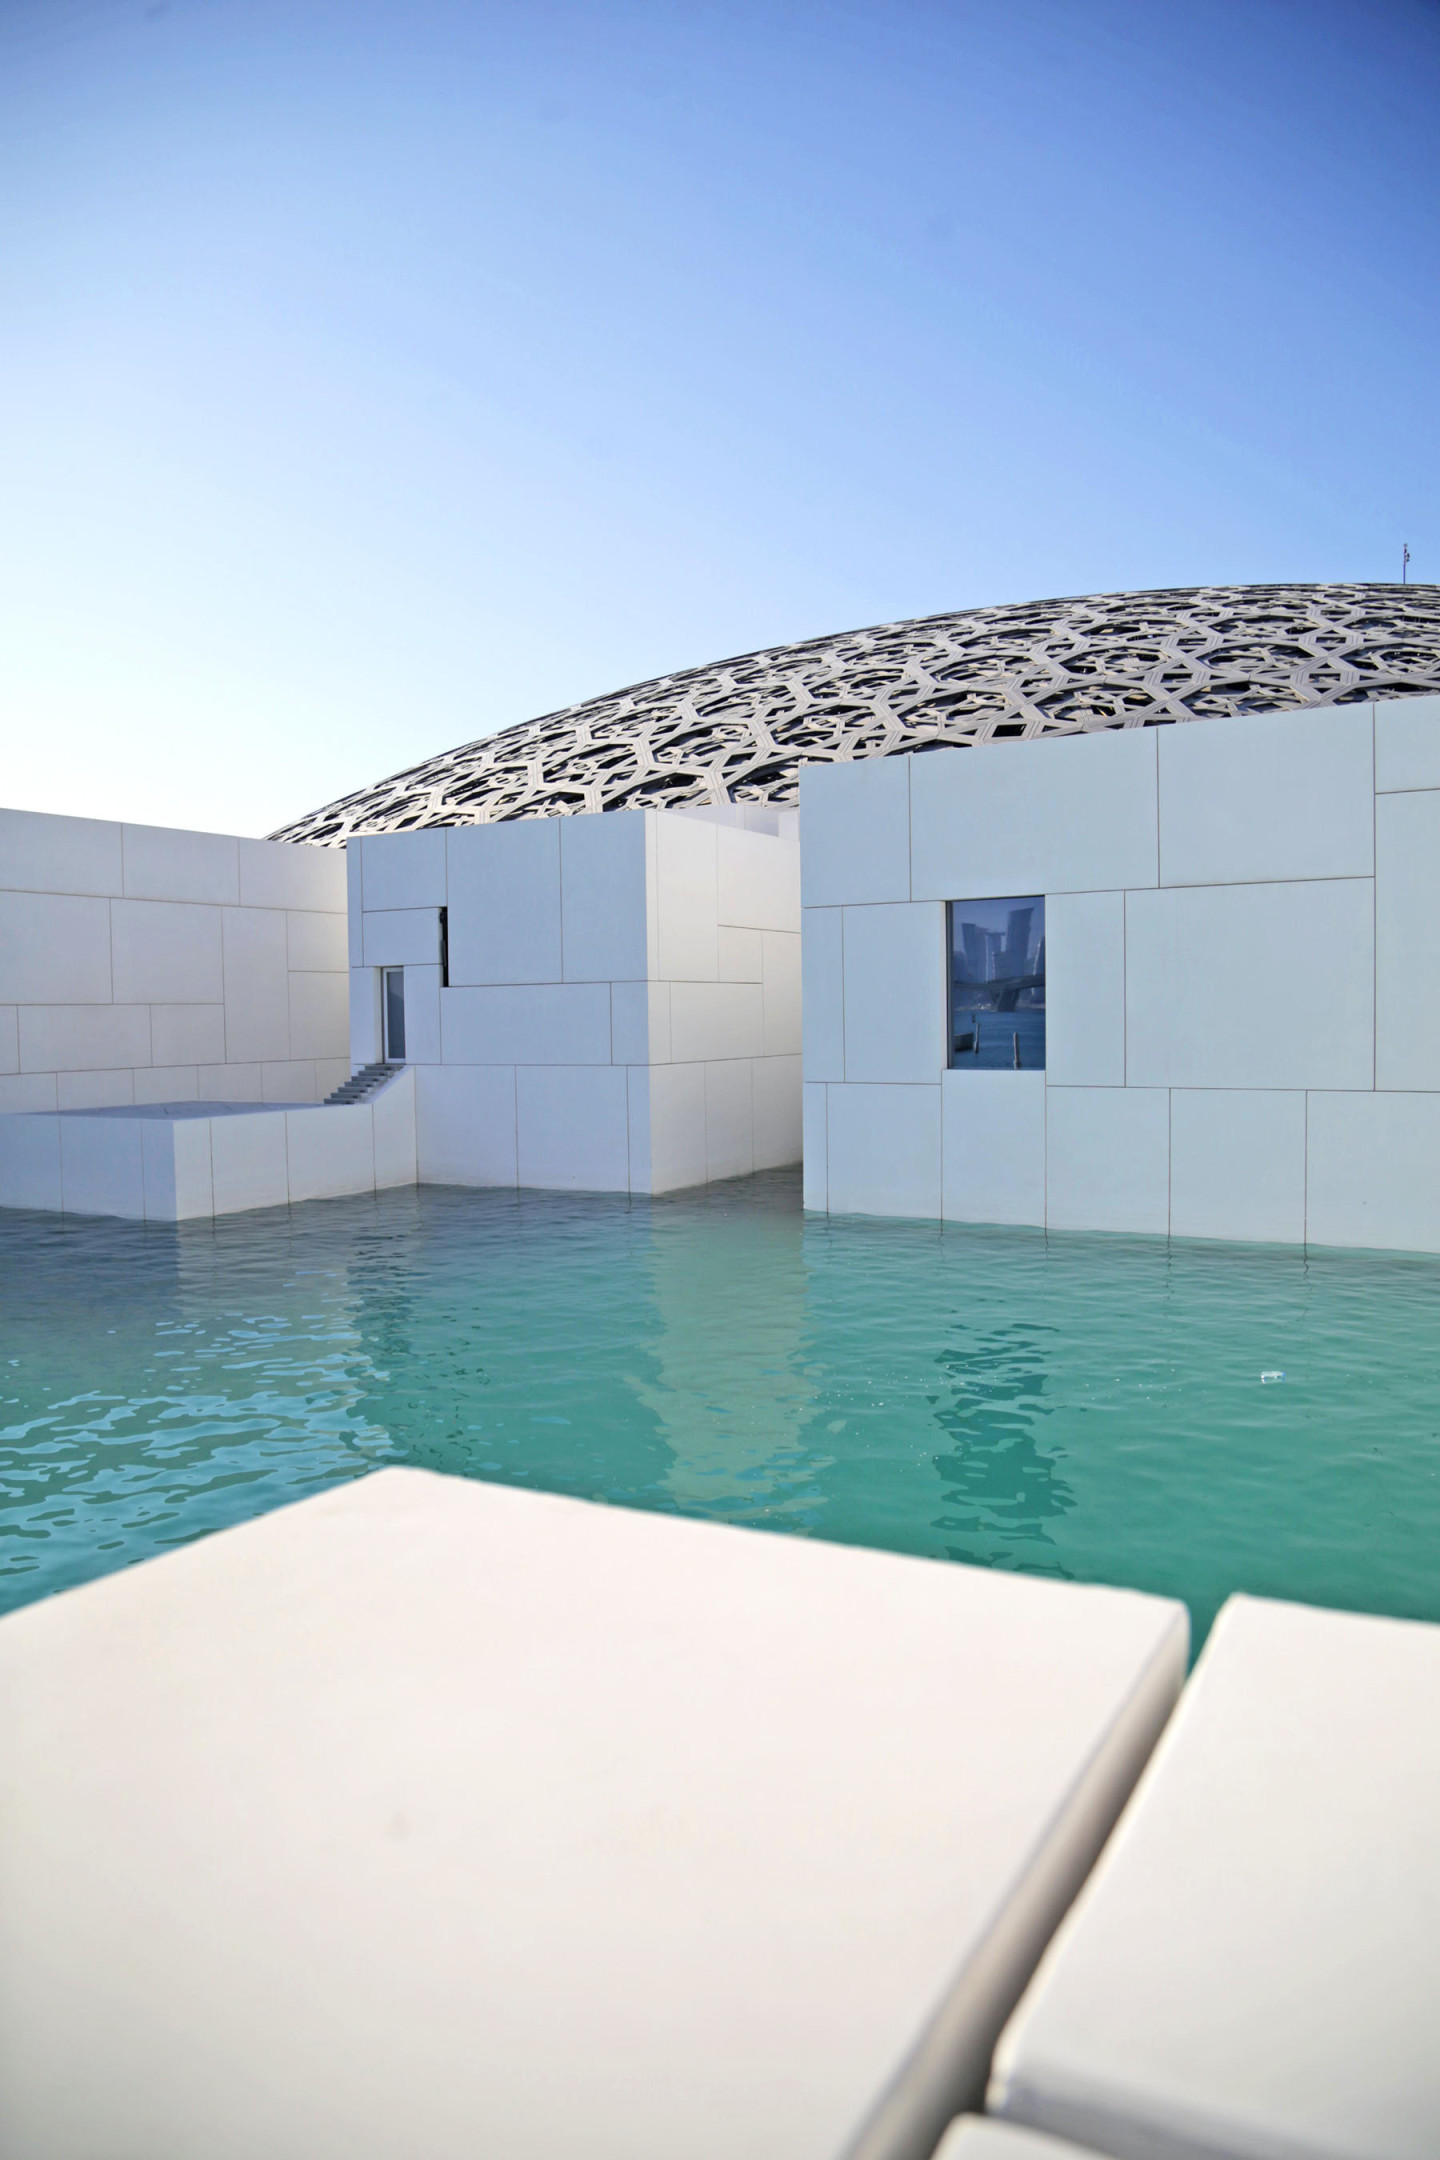 Abu Dhabi Louvres Museum architecture